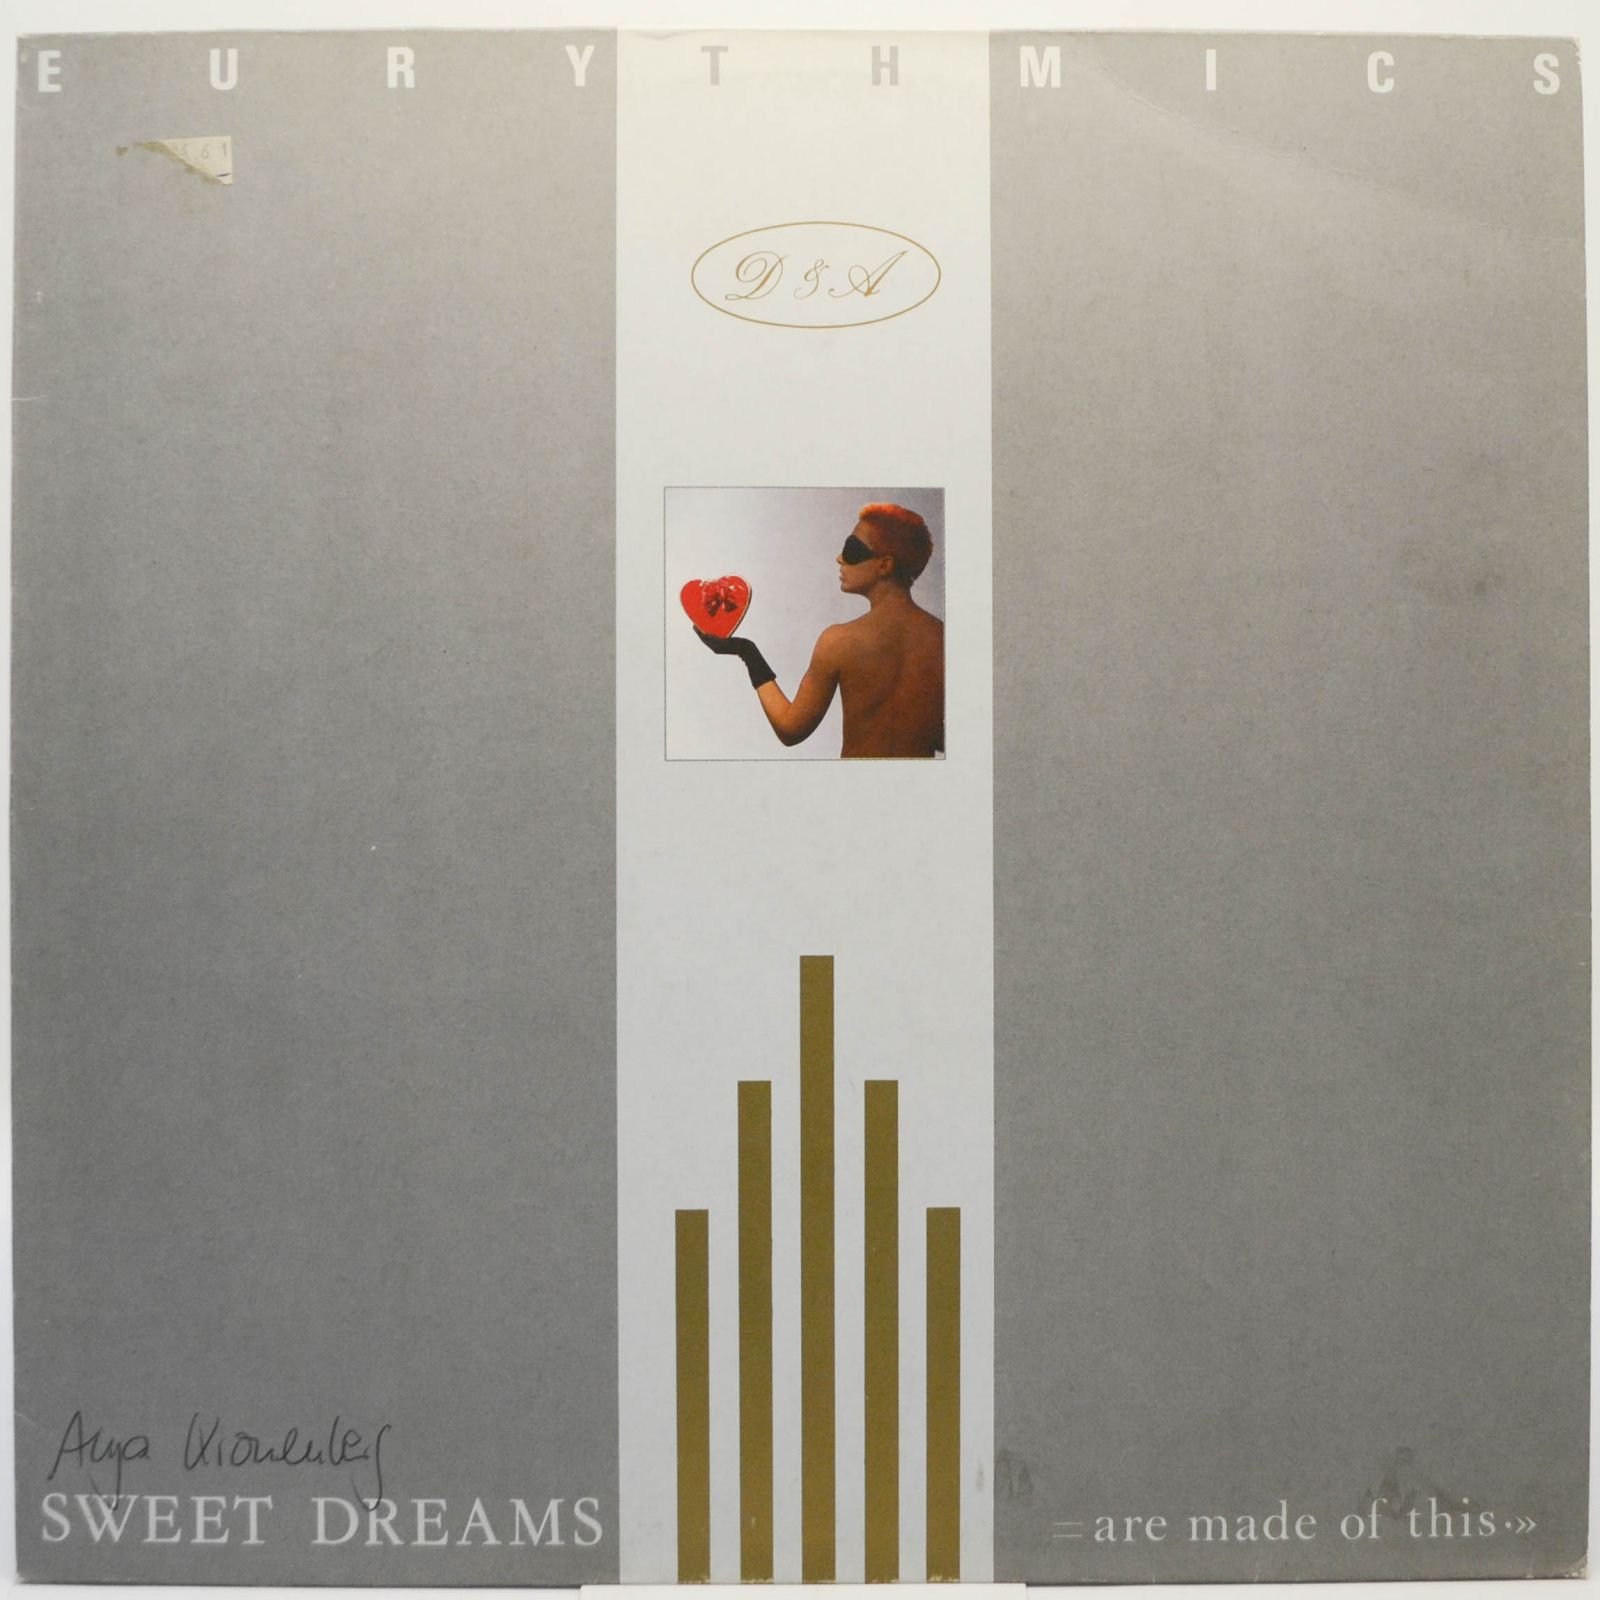 Eurythmics — Sweet Dreams (Are Made Of This), 1983